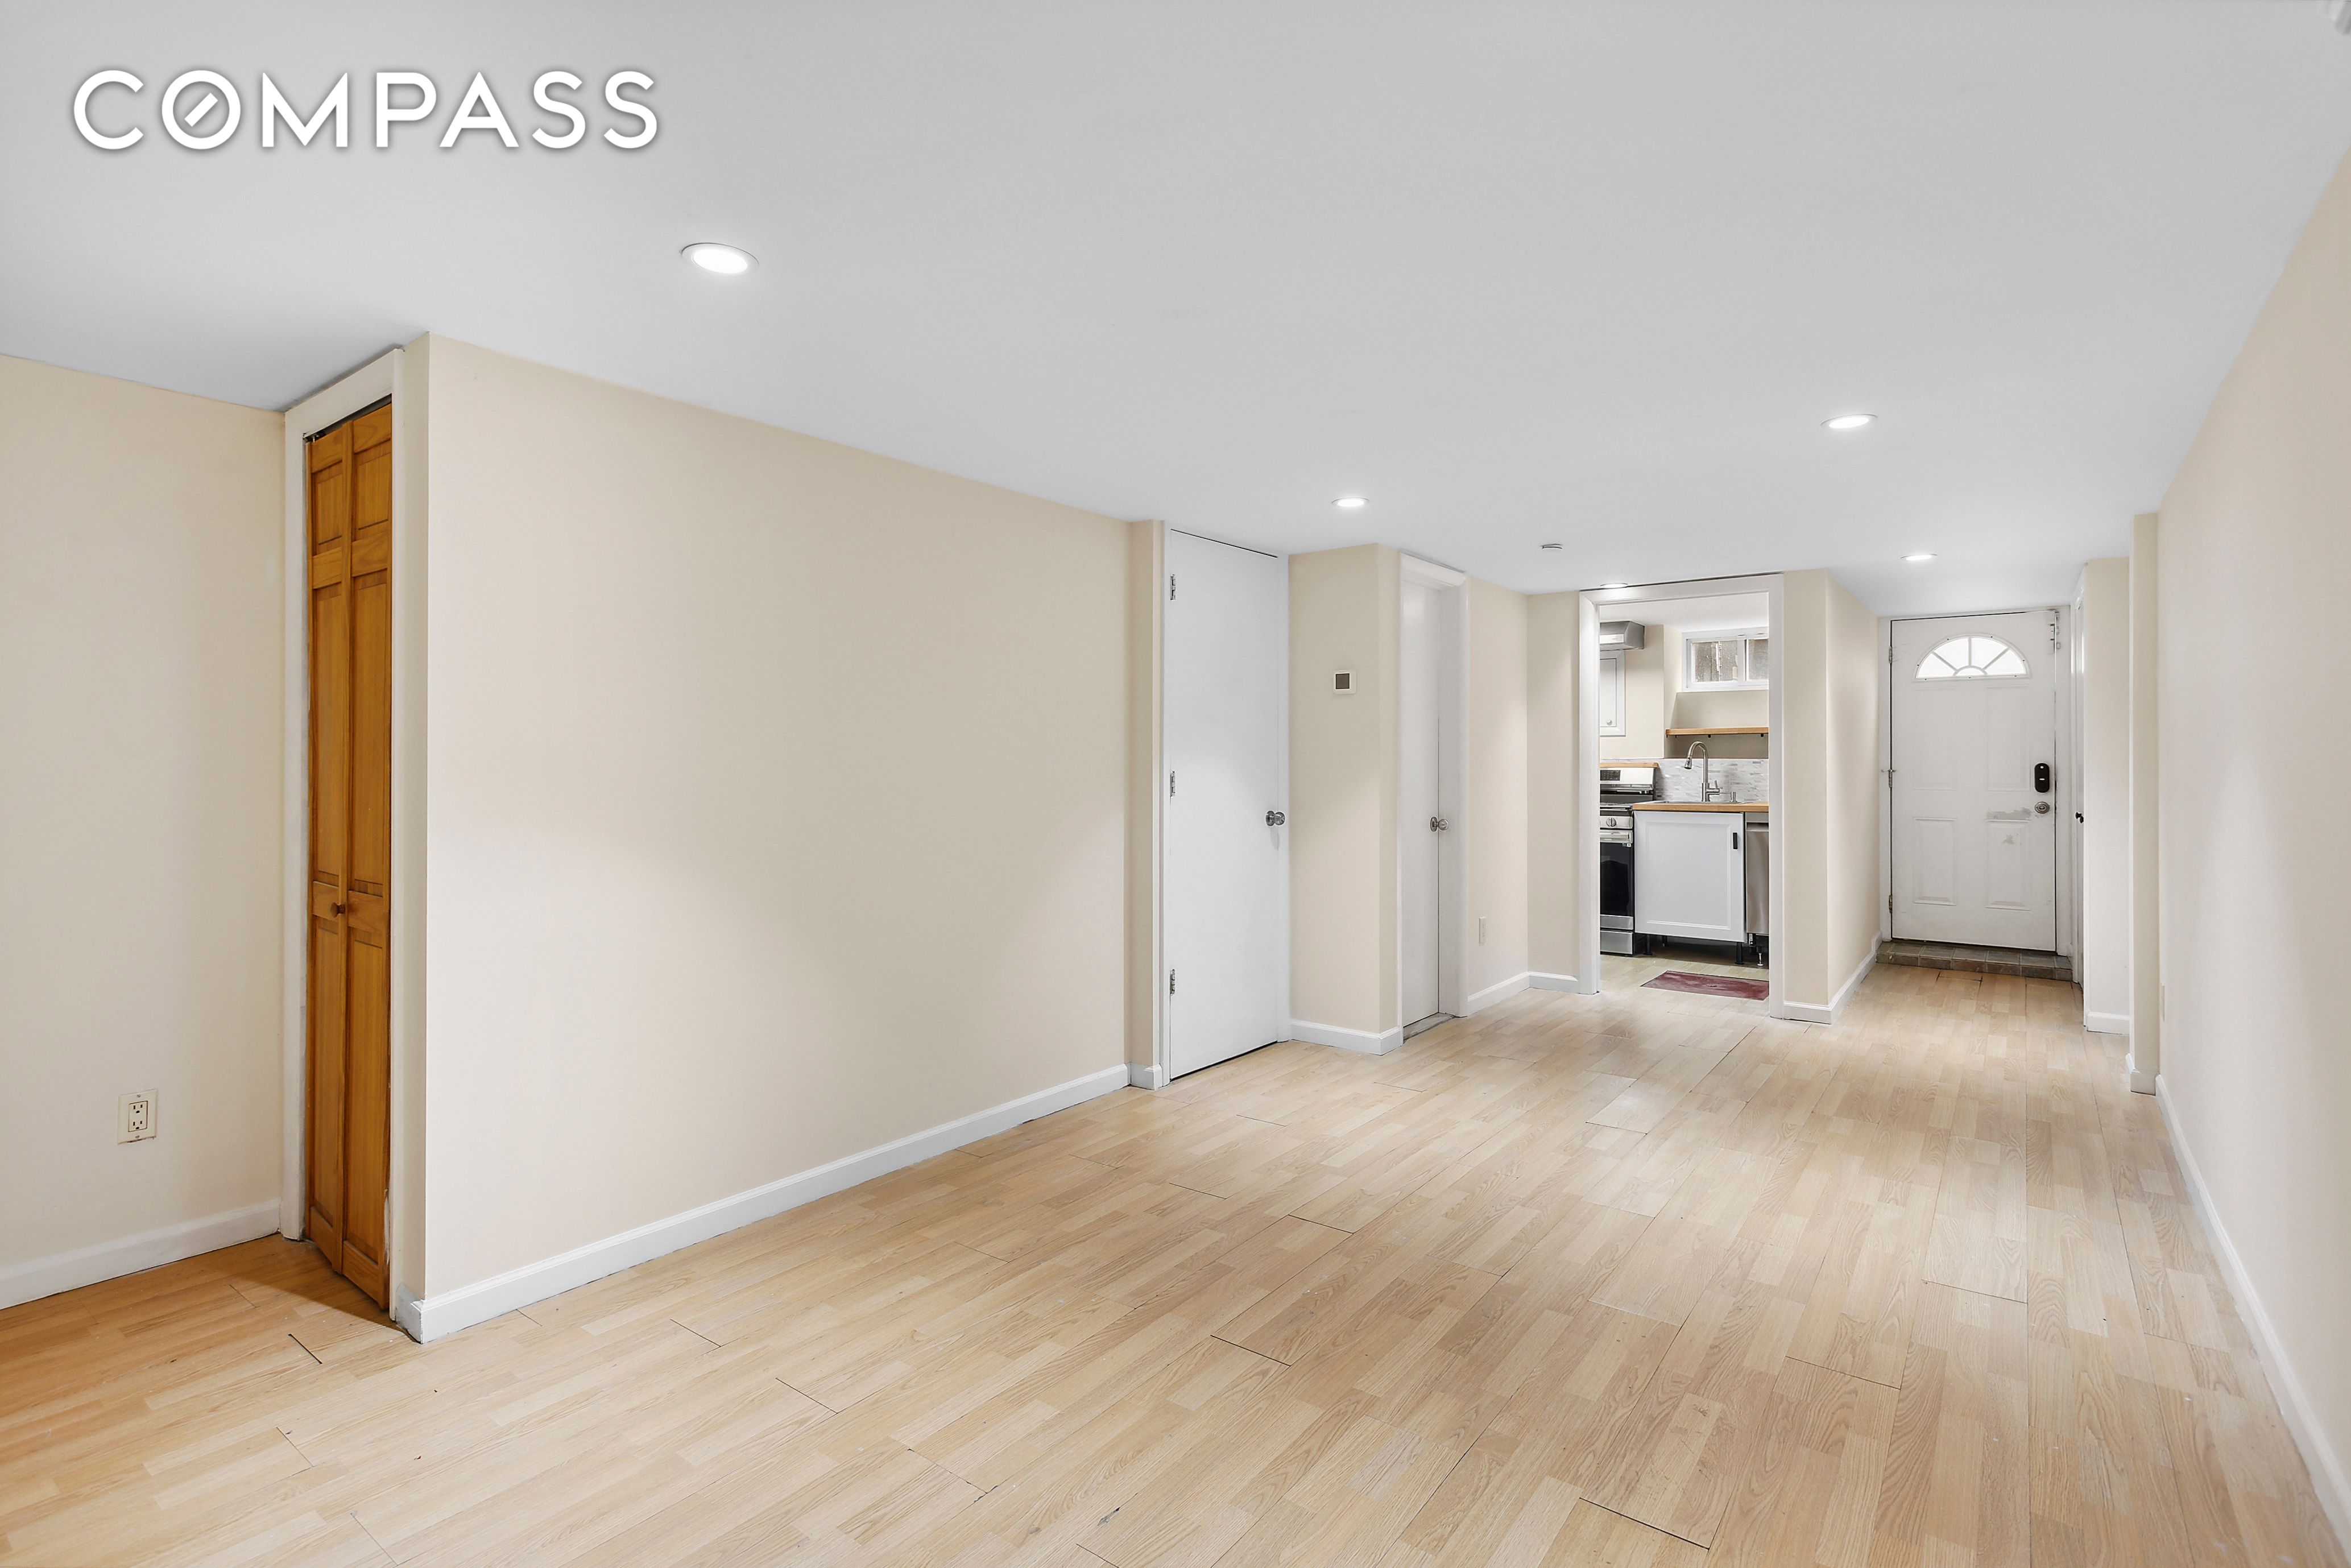 10 Jackson Place 1, Park Slope, Brooklyn, New York - 1 Bedrooms  
1 Bathrooms  
3 Rooms - 